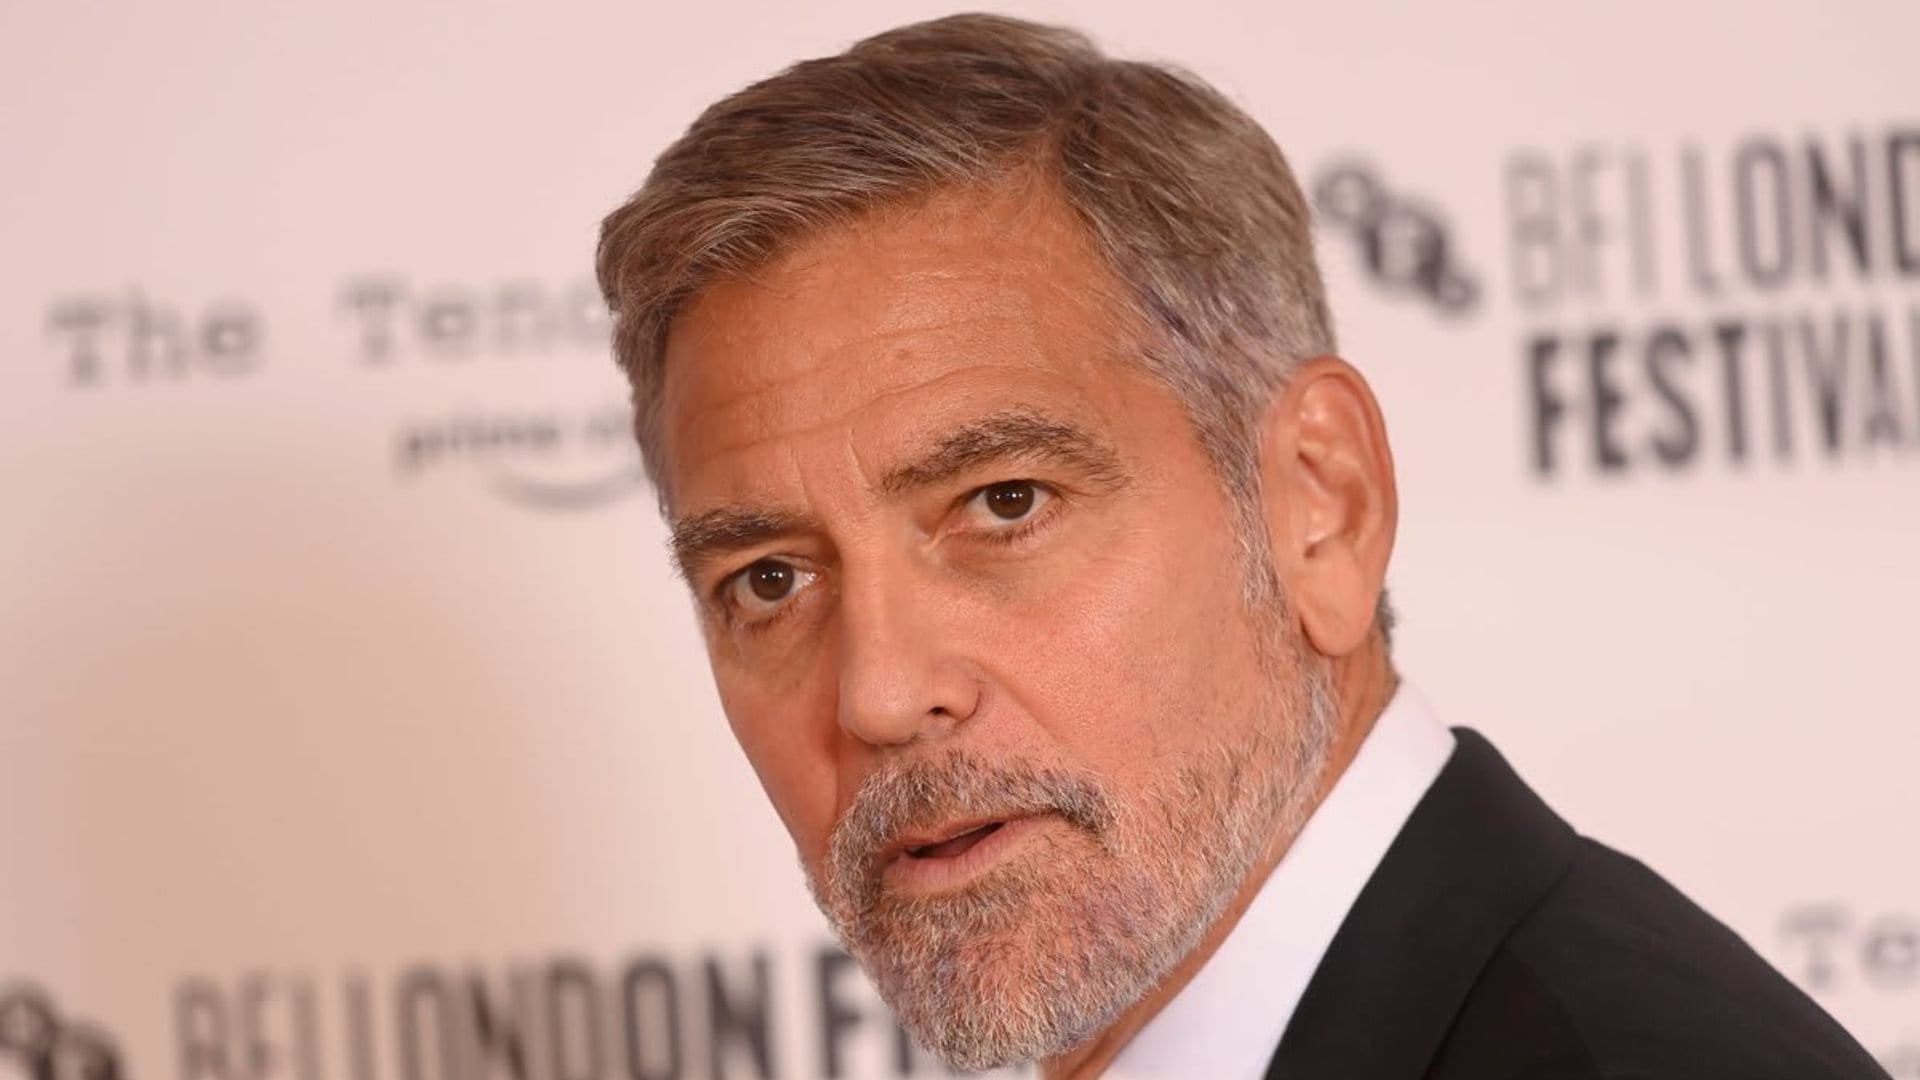 George Clooney reacts to fatal shooting on the set of Alec Baldwin western film ‘Rust’